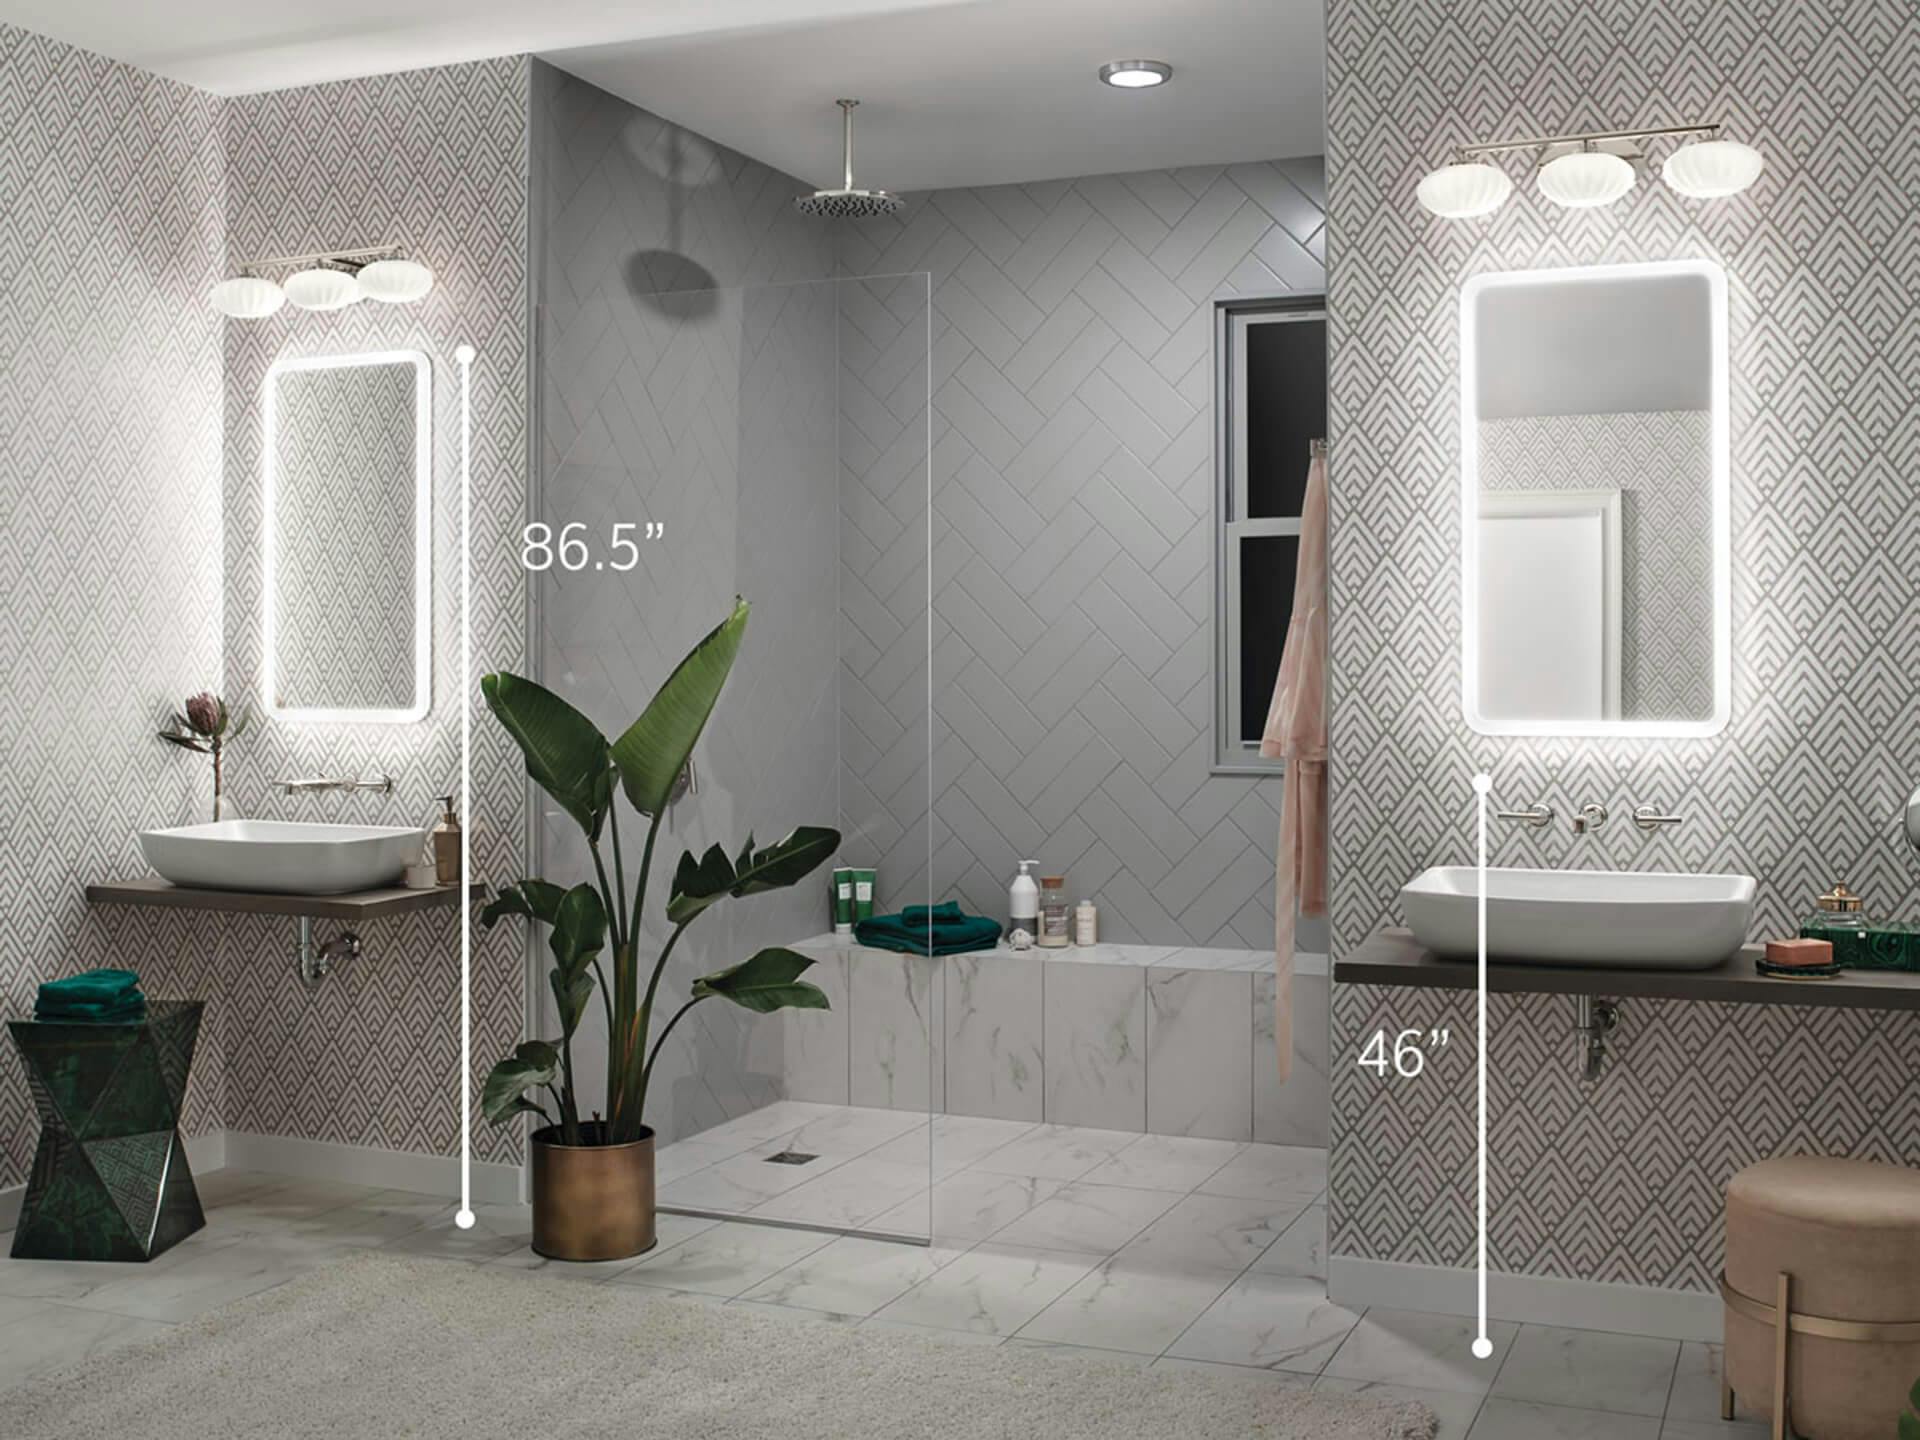 Dual vanity bathroom at night featuring Pim vanity lights above mirrors, illustrating how the lights are 86.5 inches above the ground and the bottom edge of the mirrors are 46 inches from the ground